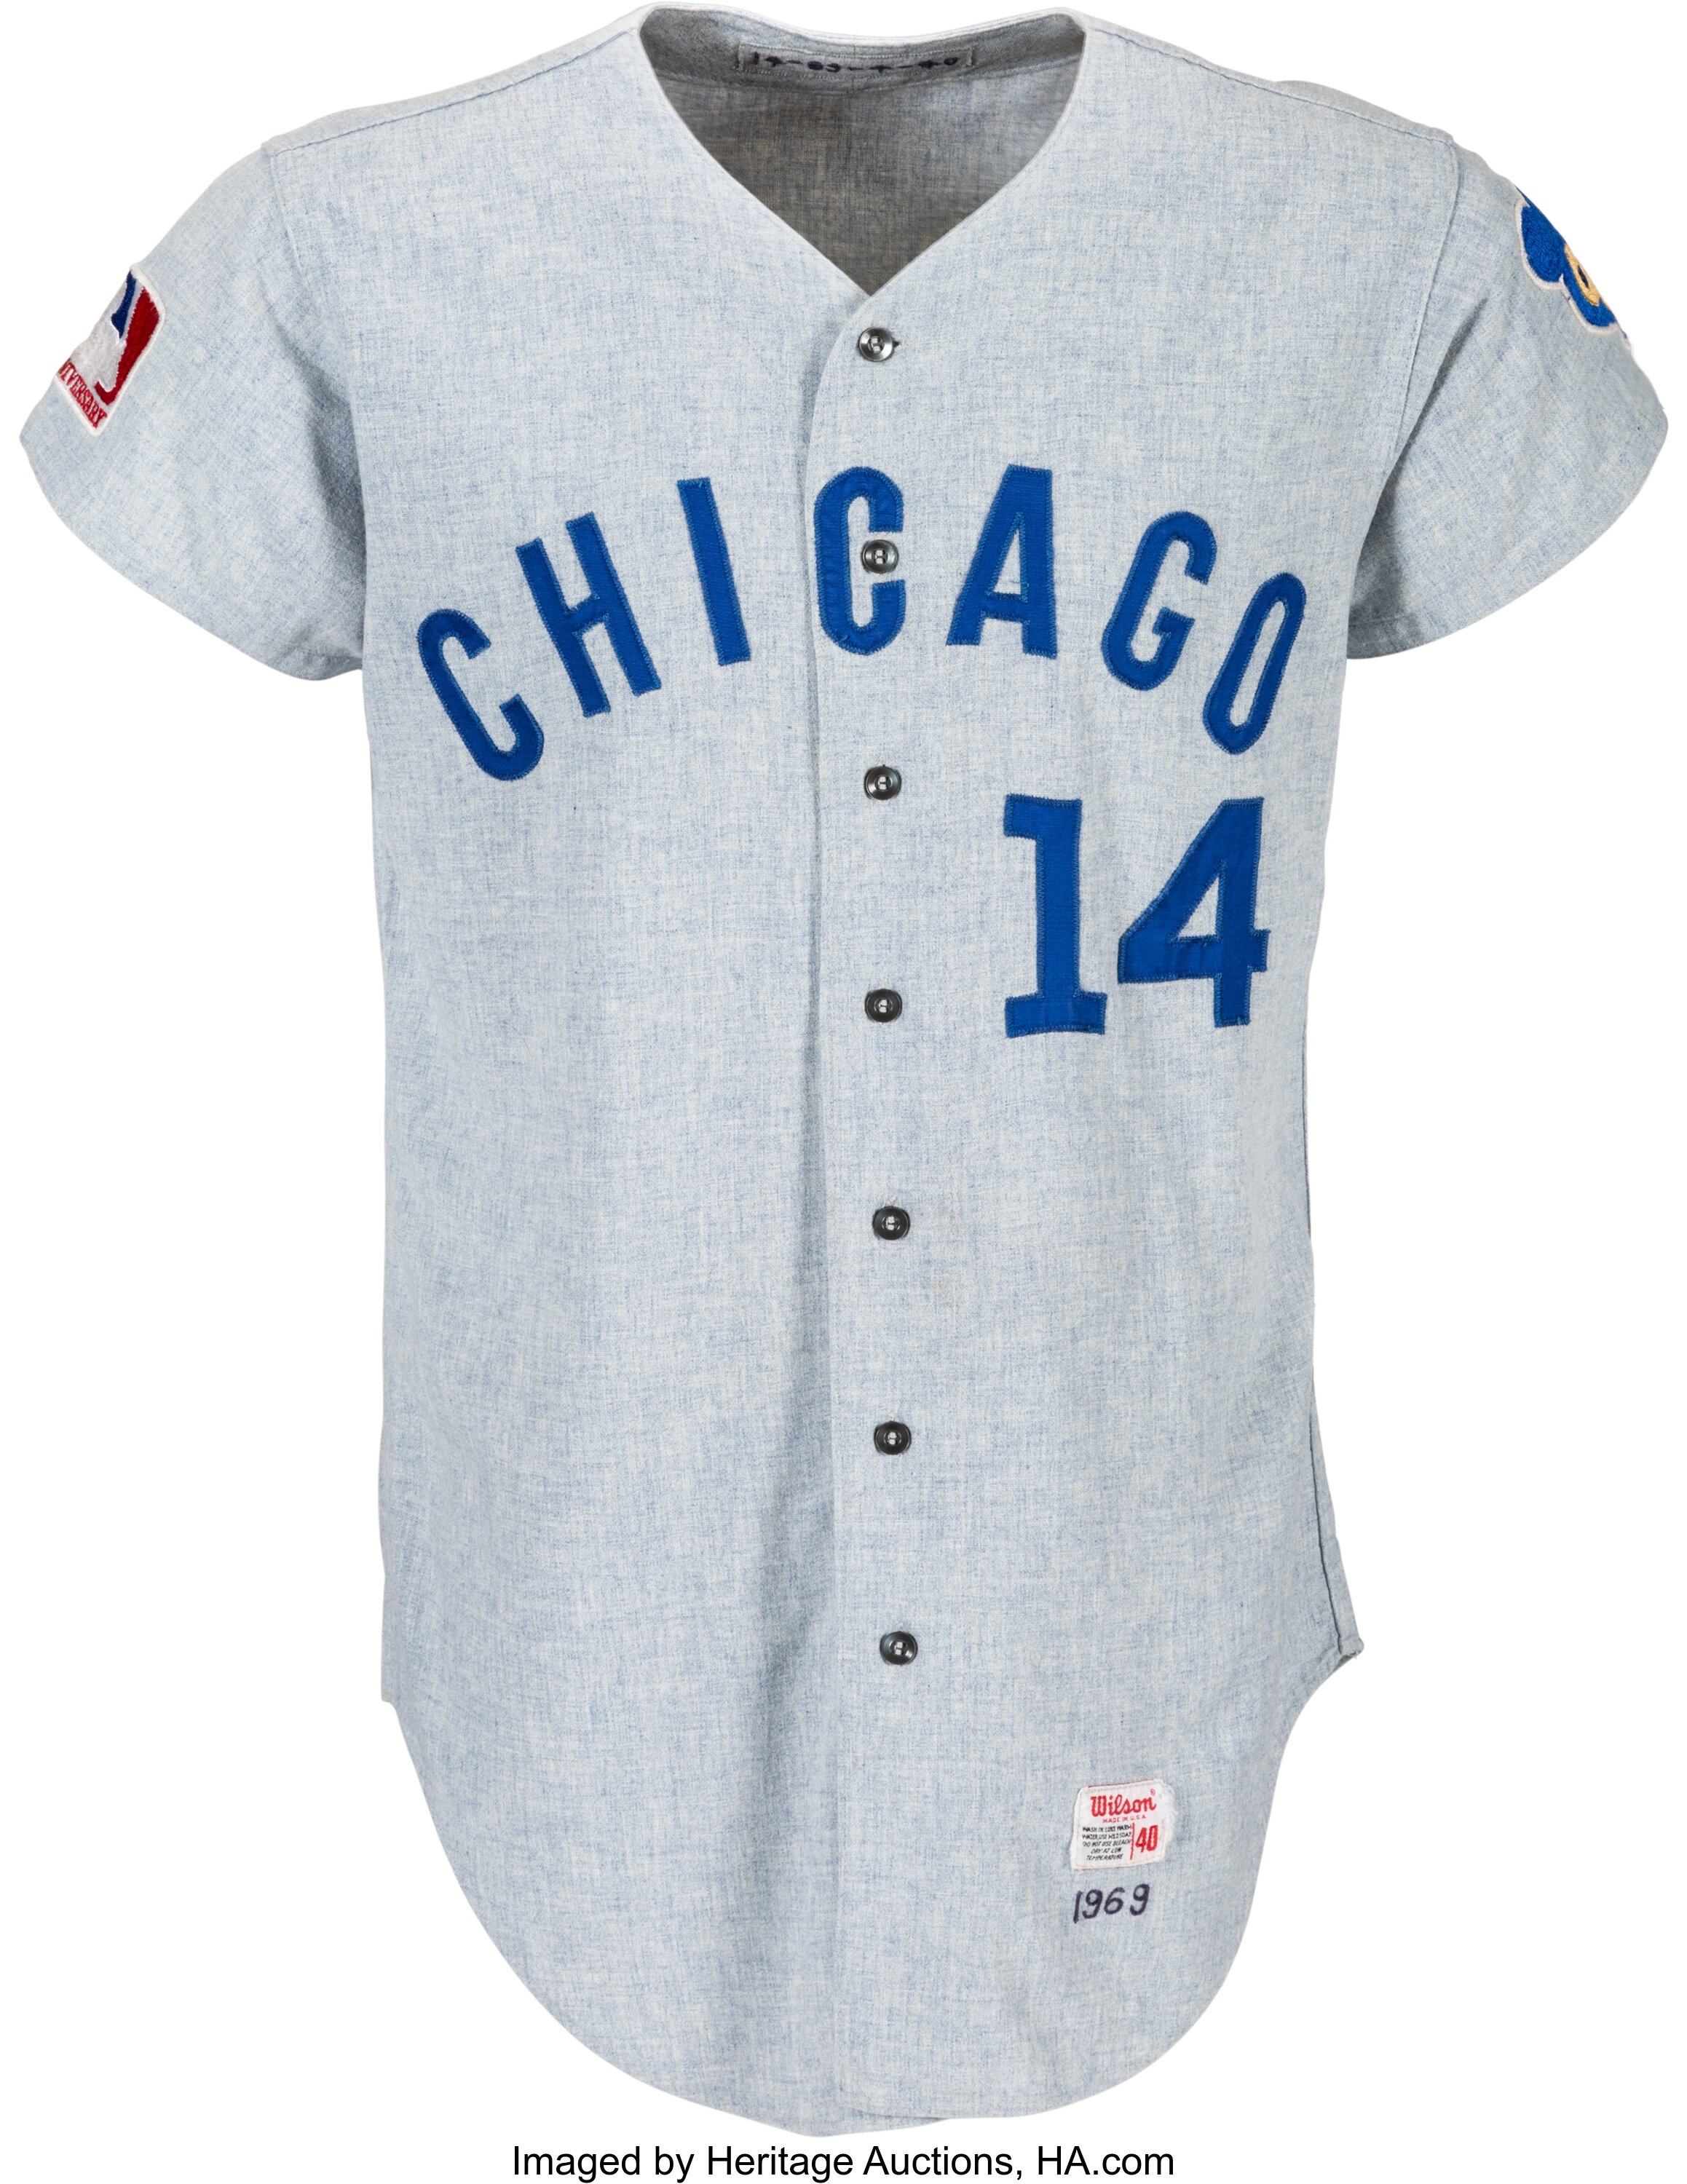 Ernie Banks home team jersey is up for auction - Positively Naperville